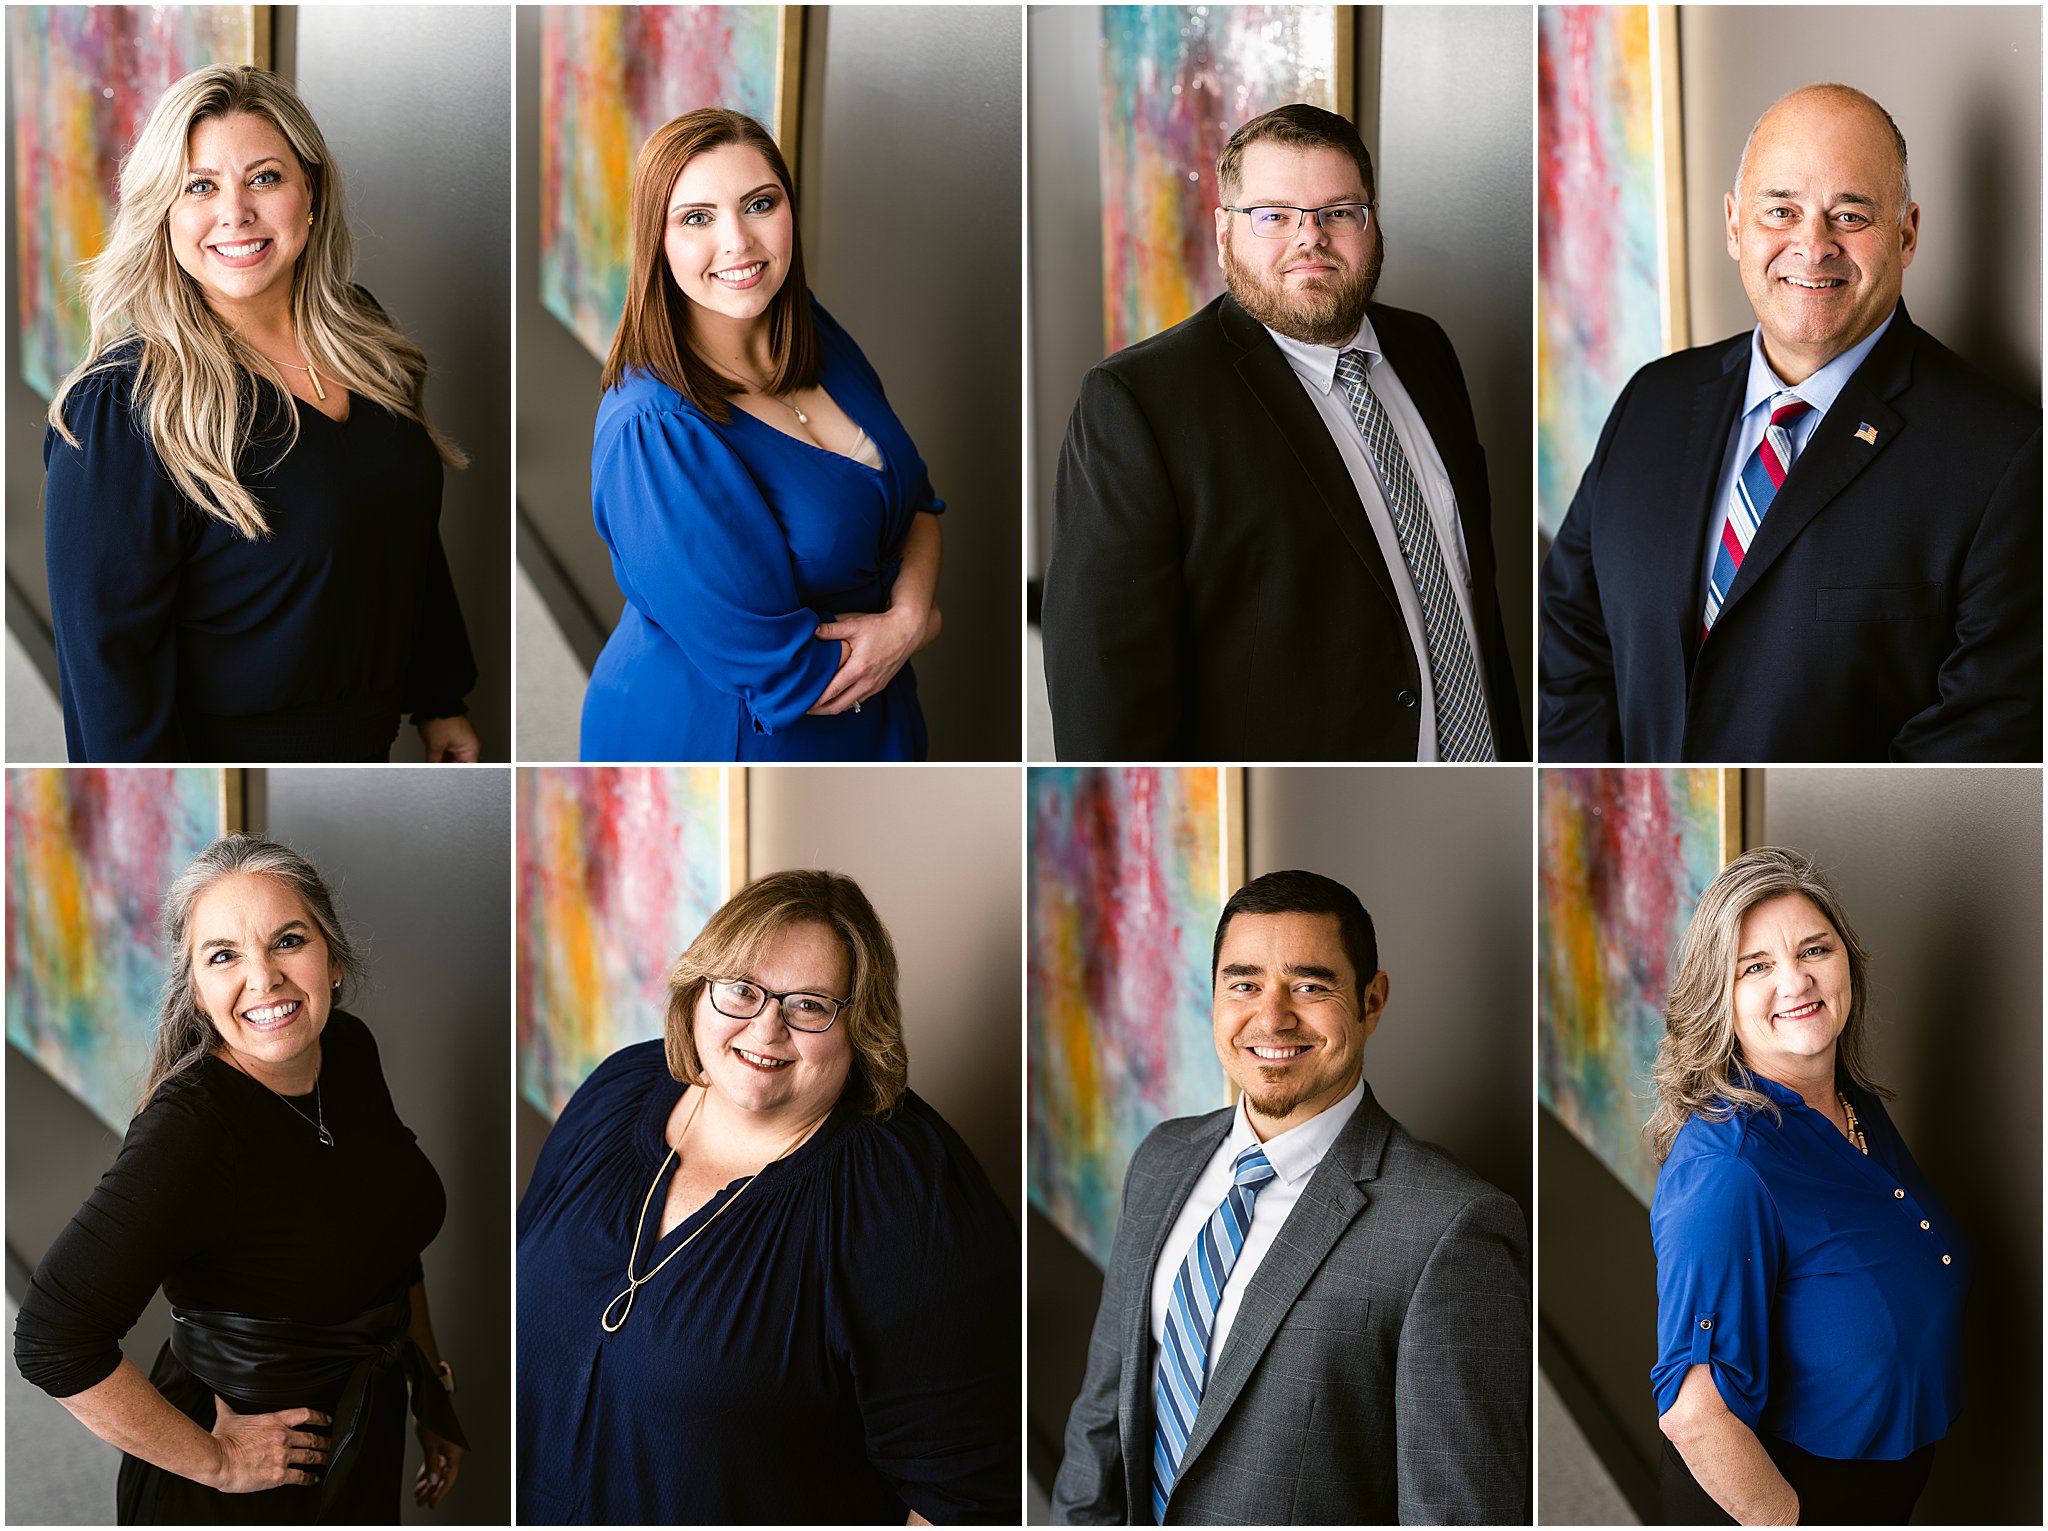 Court reporters in a professional headshot pose